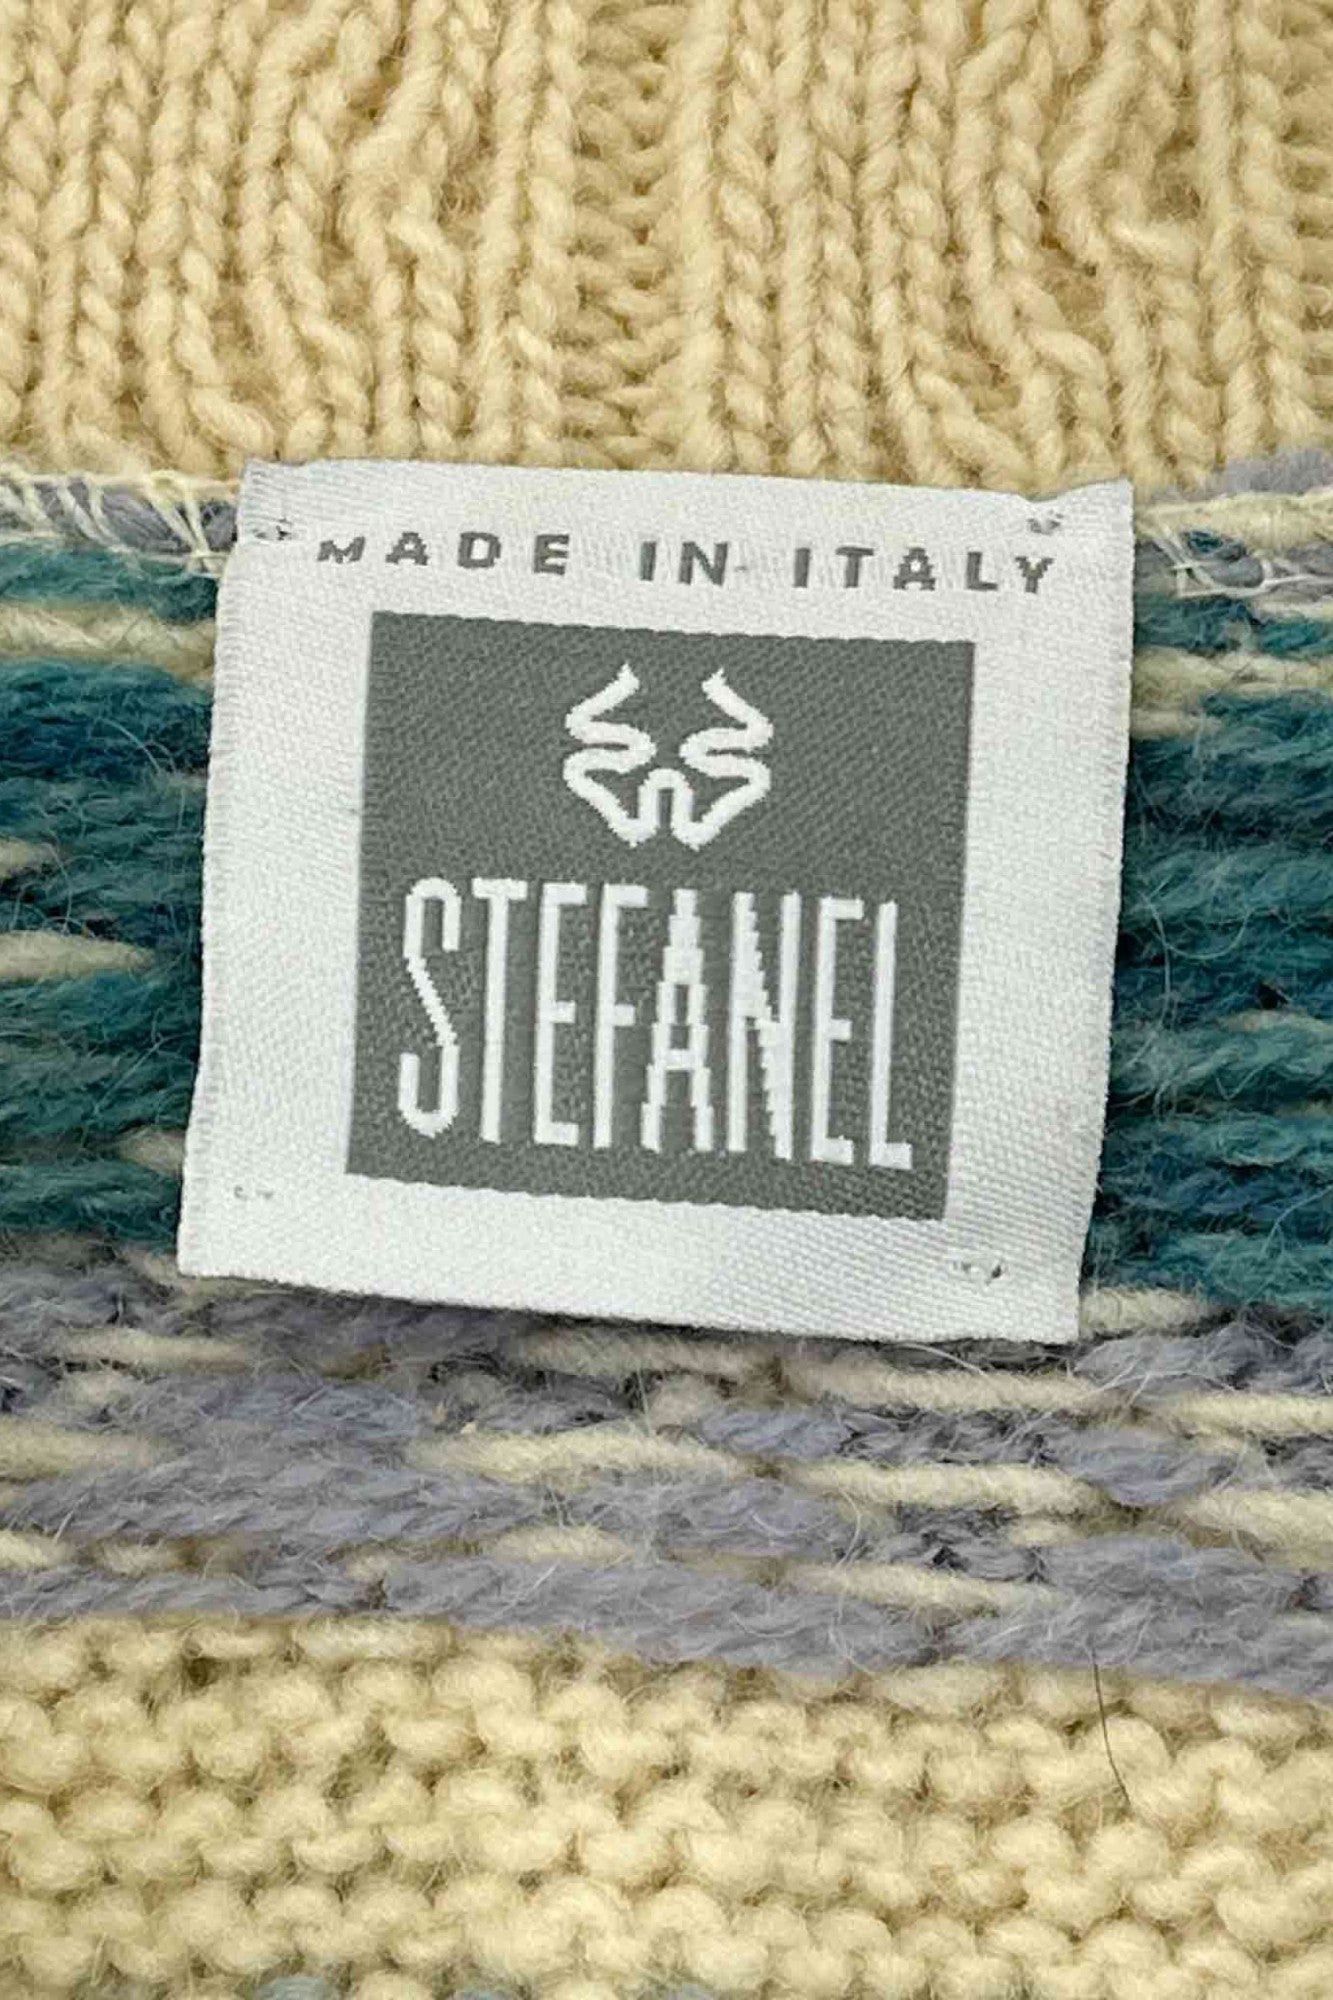 Made in Italy STEFANEL knit cardiigan